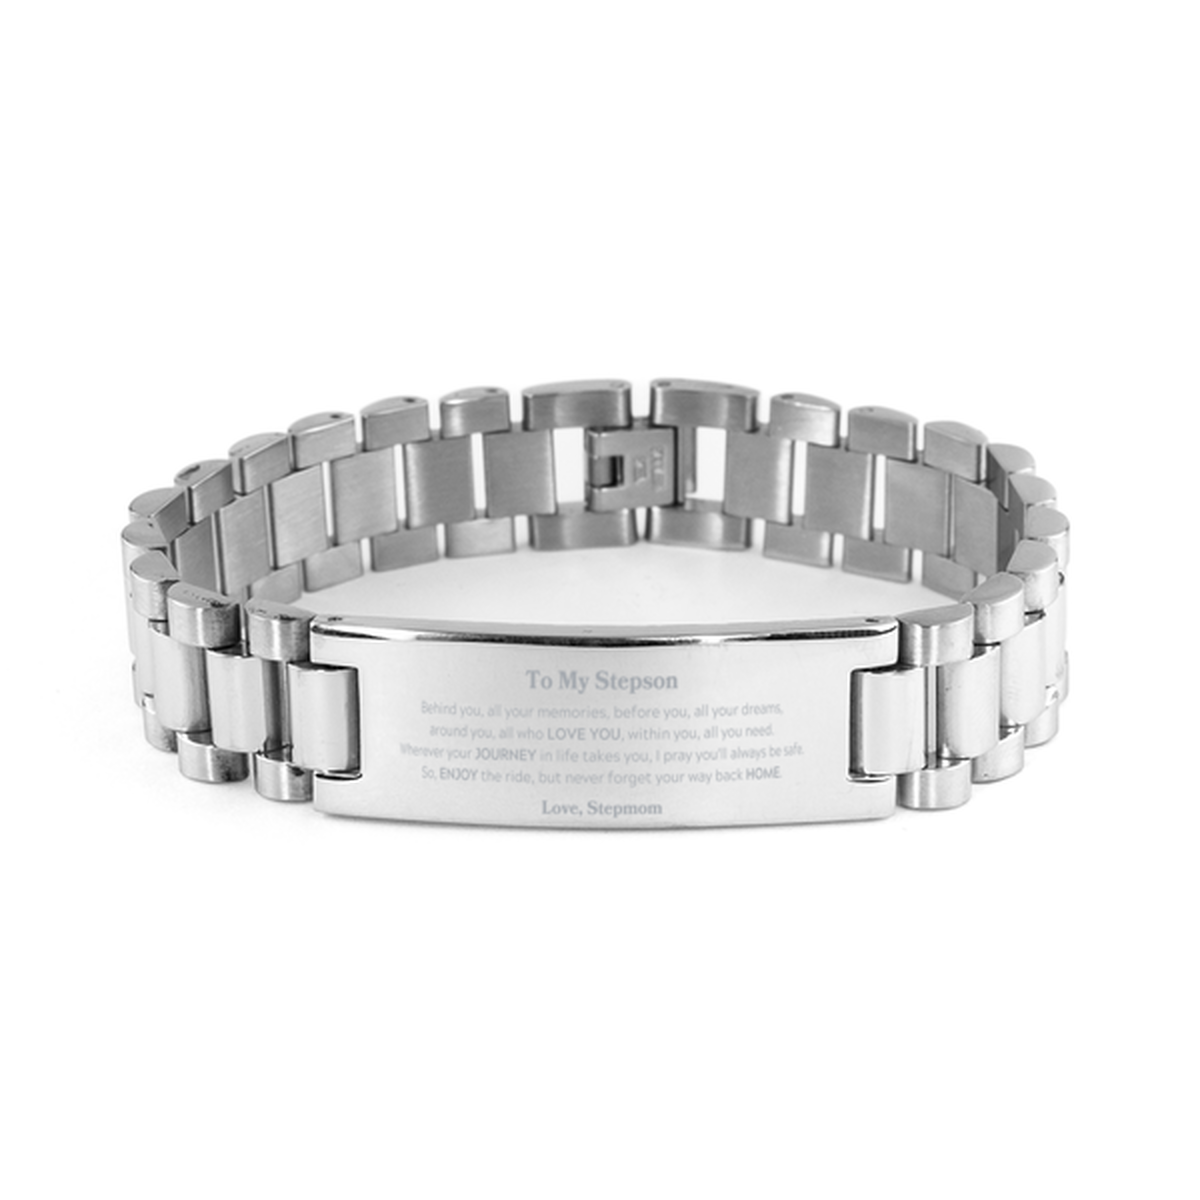 To My Stepson Graduation Gifts from Stepmom, Stepson Ladder Stainless Steel Bracelet Christmas Birthday Gifts for Stepson Behind you, all your memories, before you, all your dreams. Love, Stepmom